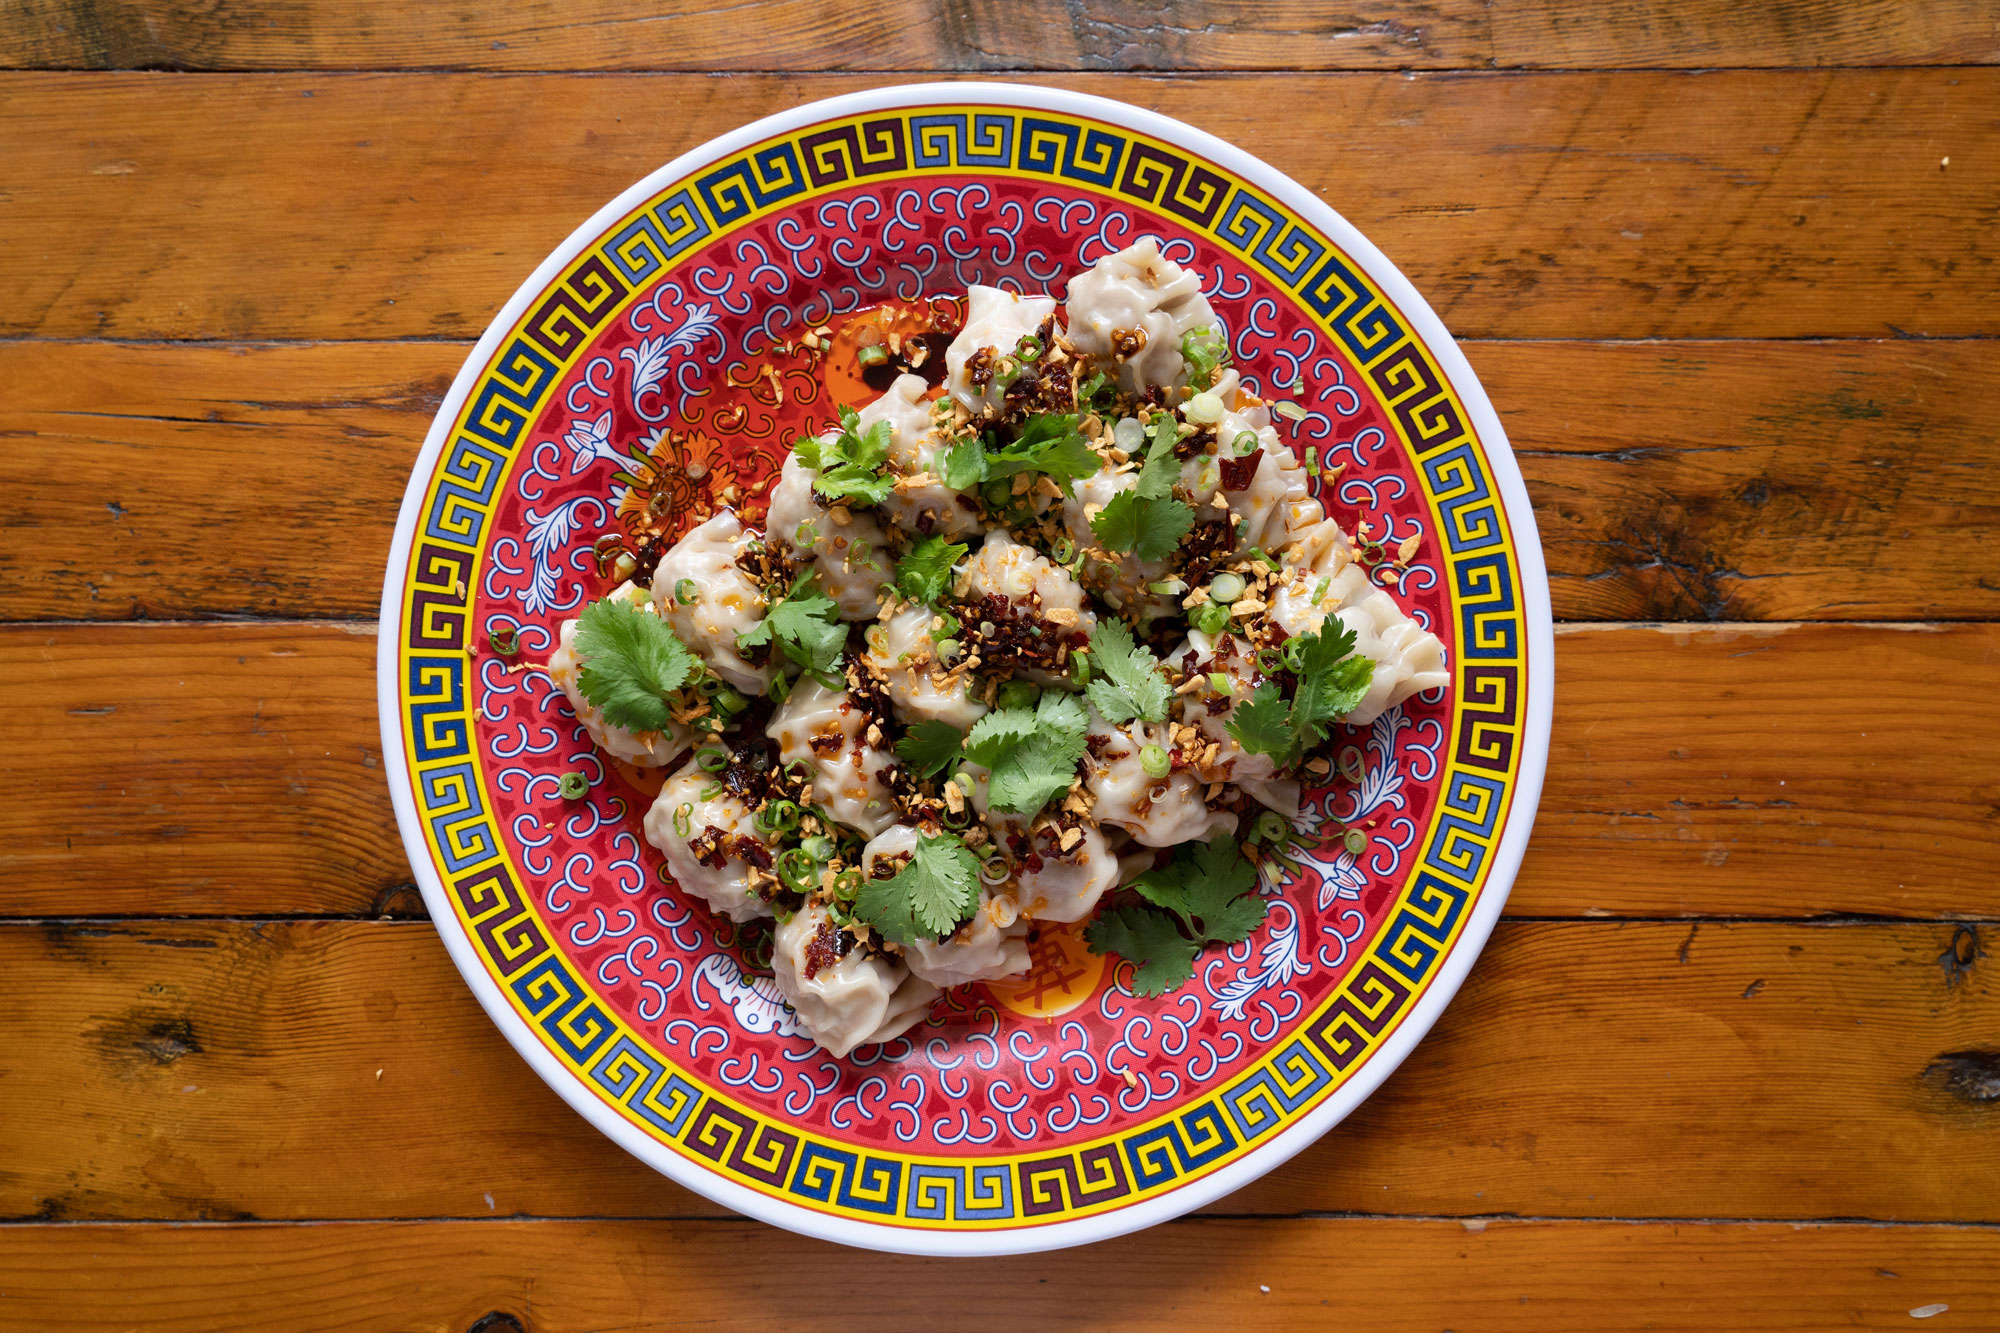 Dumplings, served with red chili oil